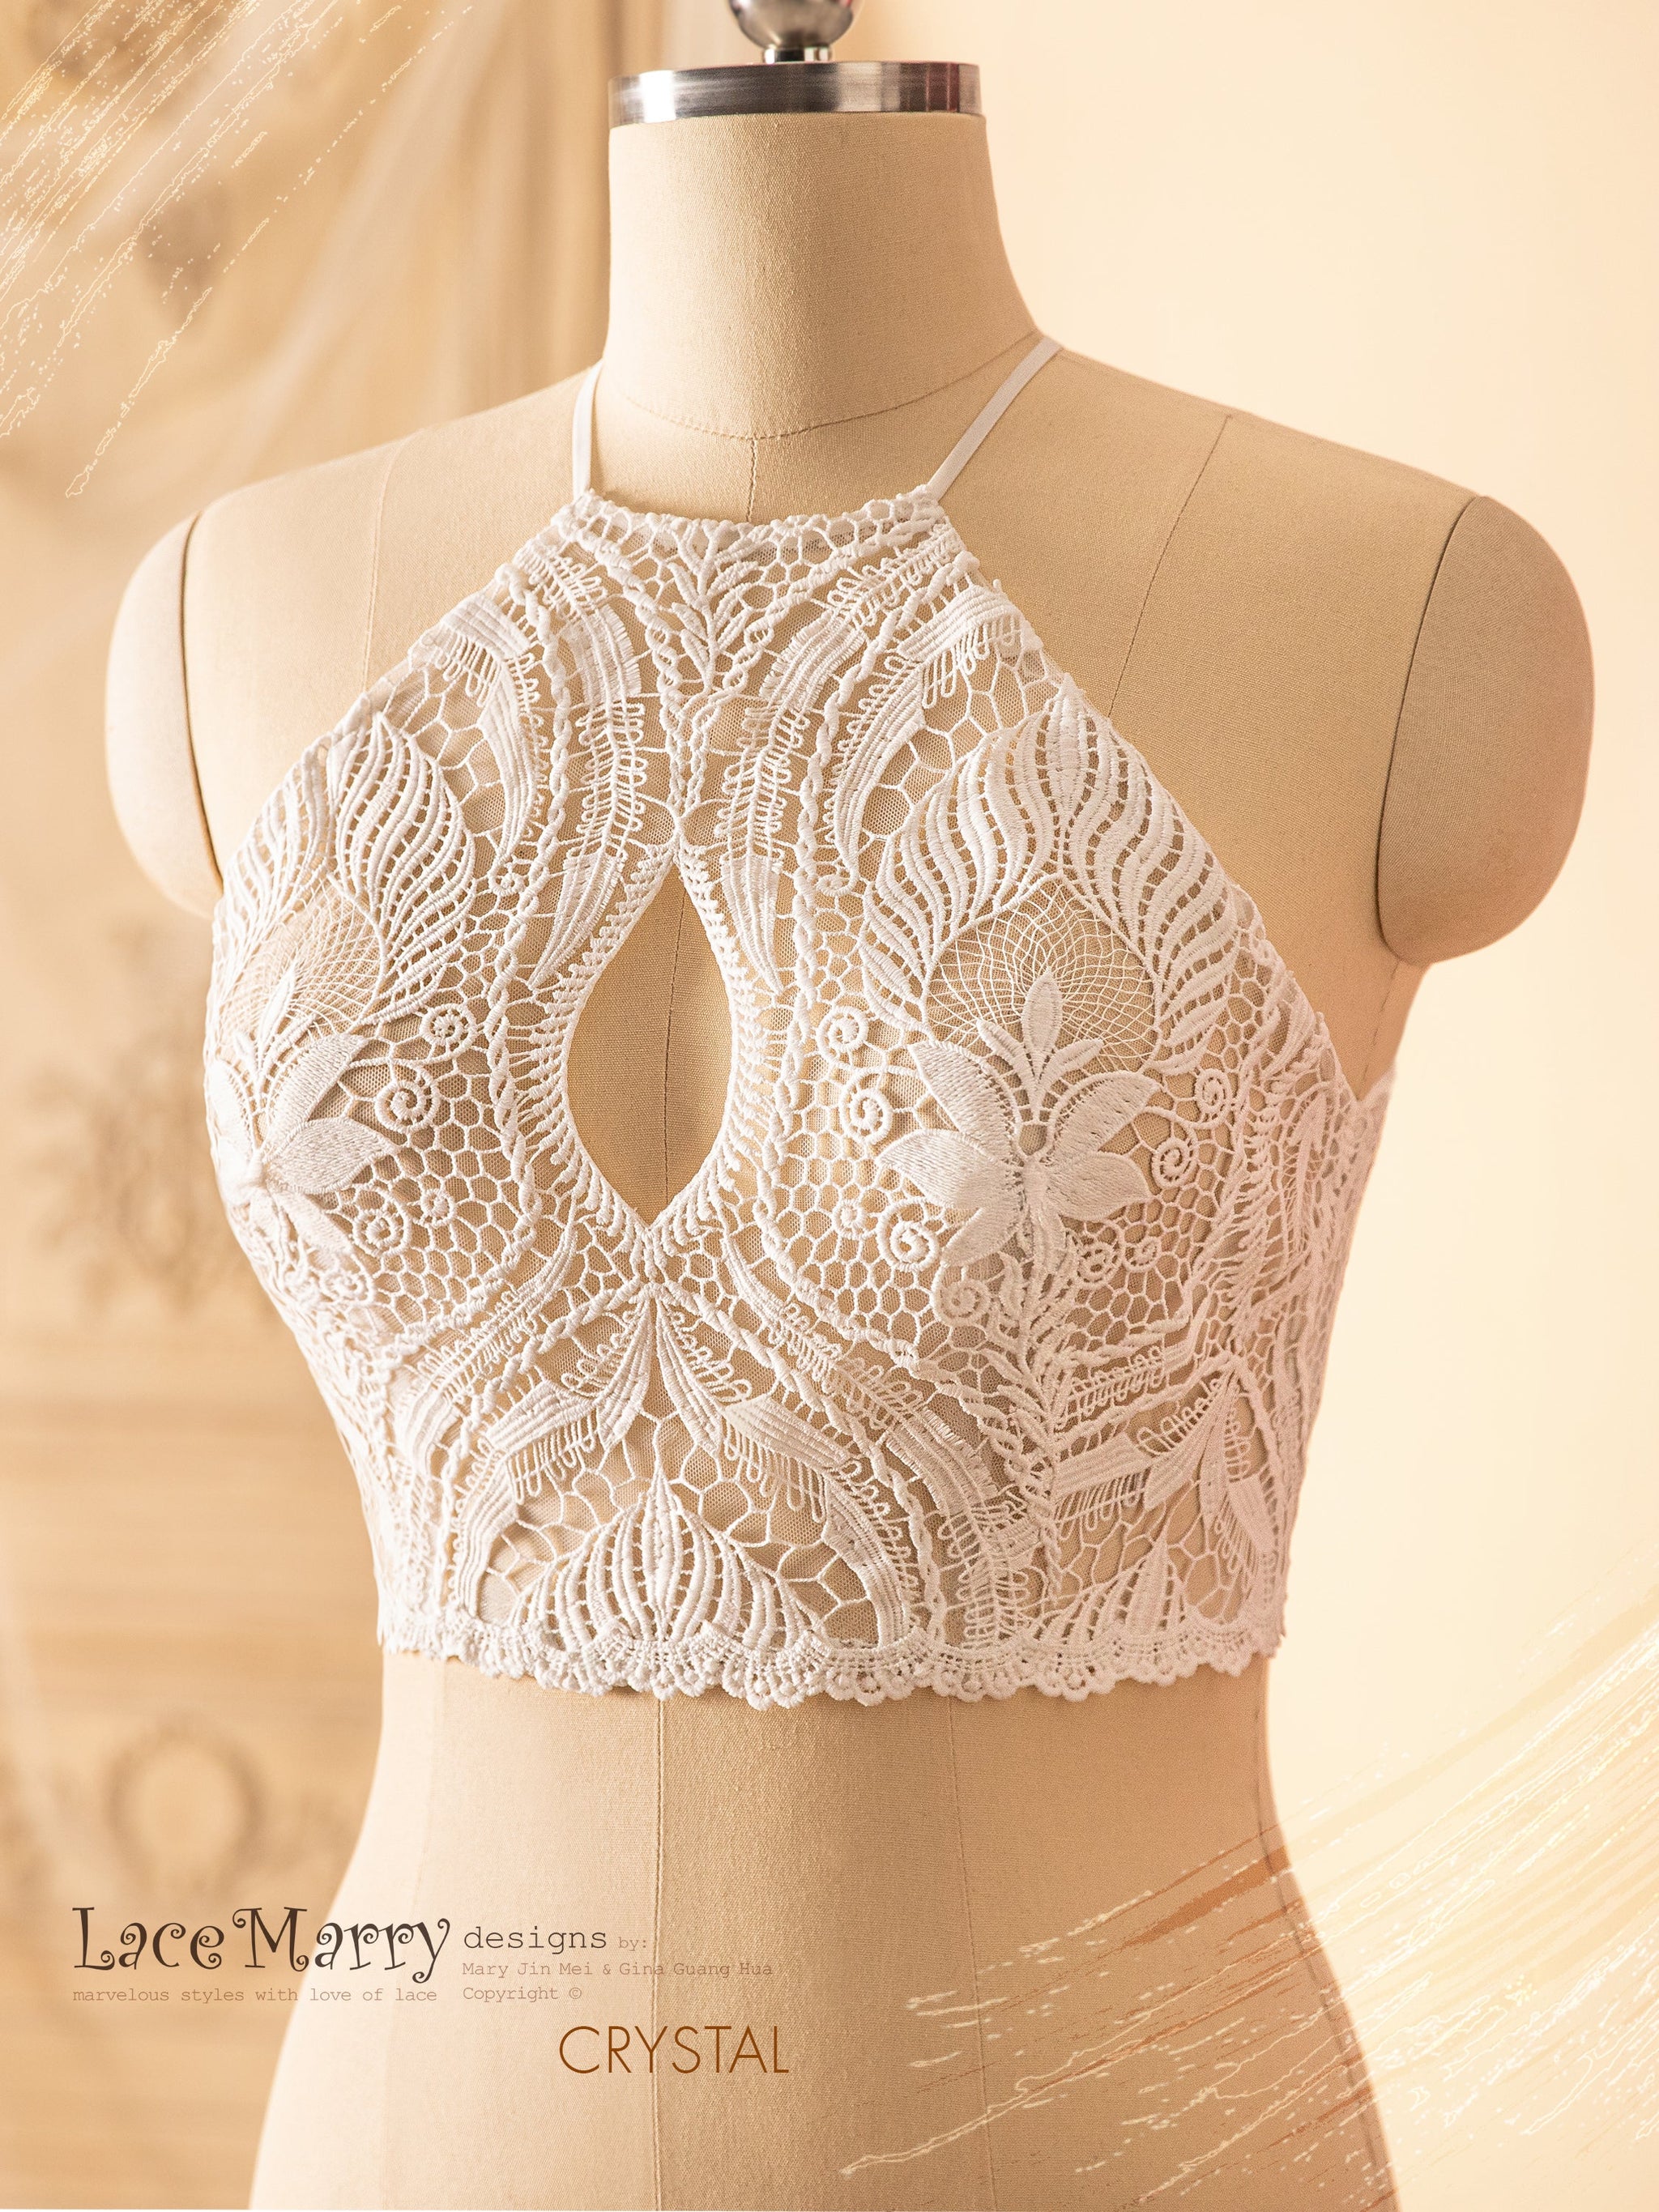 Crystal Lace Pattern Collection